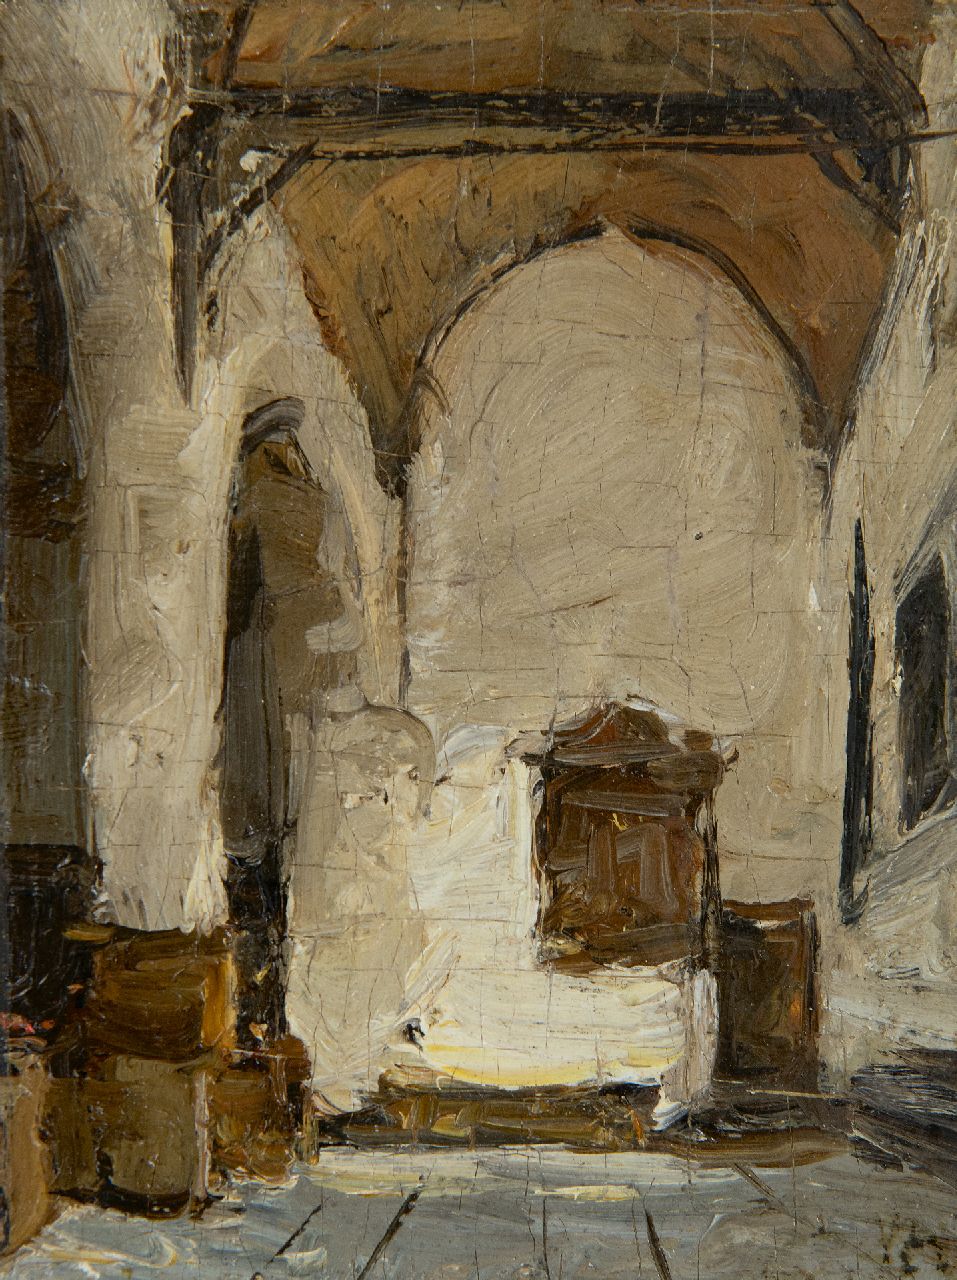 Bosboom J.  | Johannes Bosboom | Paintings offered for sale | Church interior, oil on panel 12.0 x 9.1 cm, signed l.r. with initials